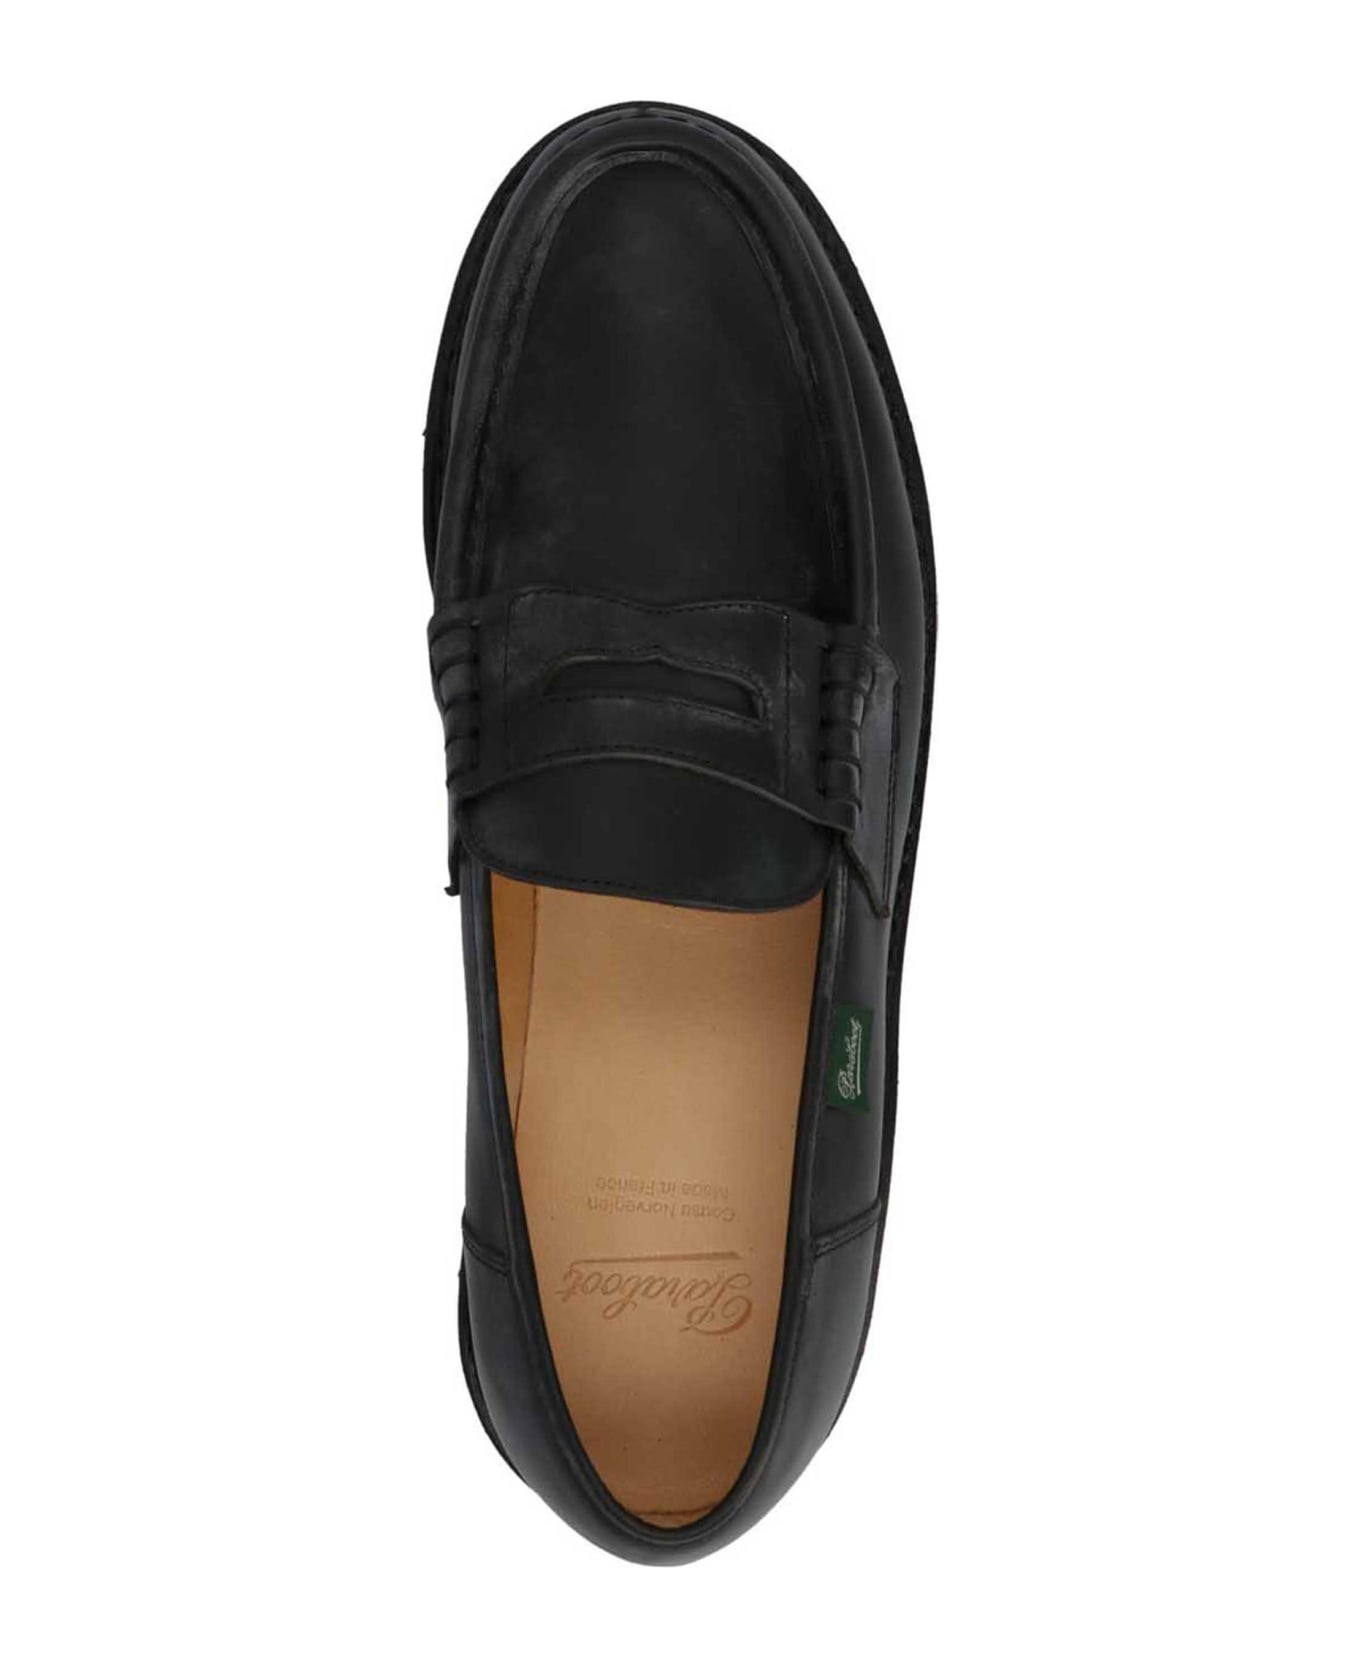 Paraboot 'remis' Loafers - Black  